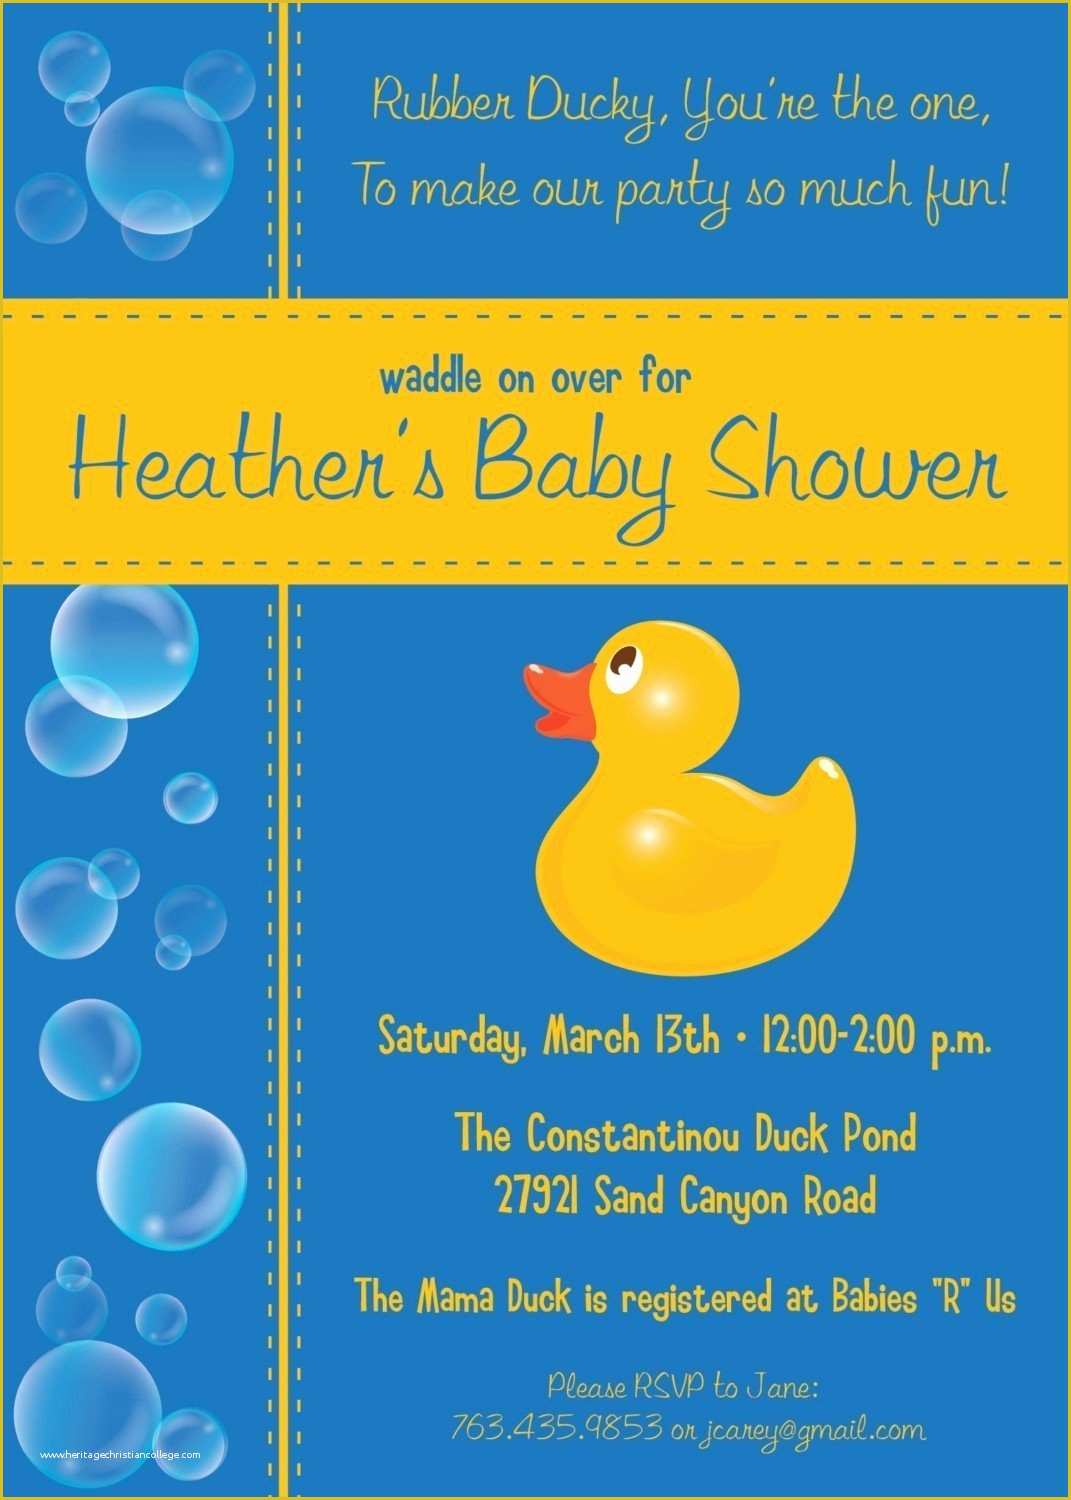 Free Rubber Ducky Baby Shower Invitations Template Of Rubber Ducky Invitation Templates